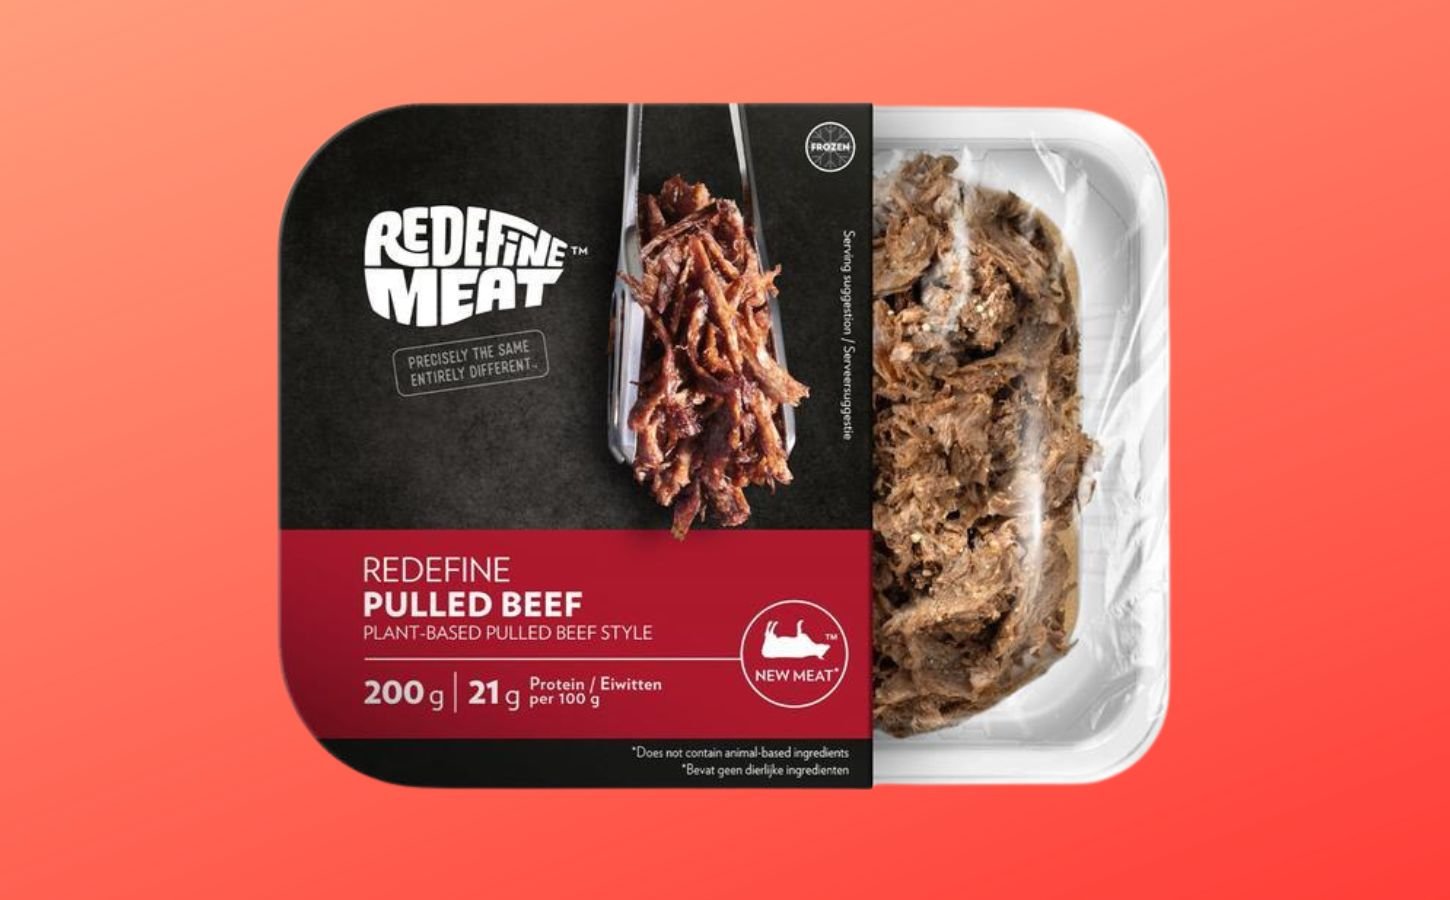 A packed of Redefine Meat vegan pork in front of a red background